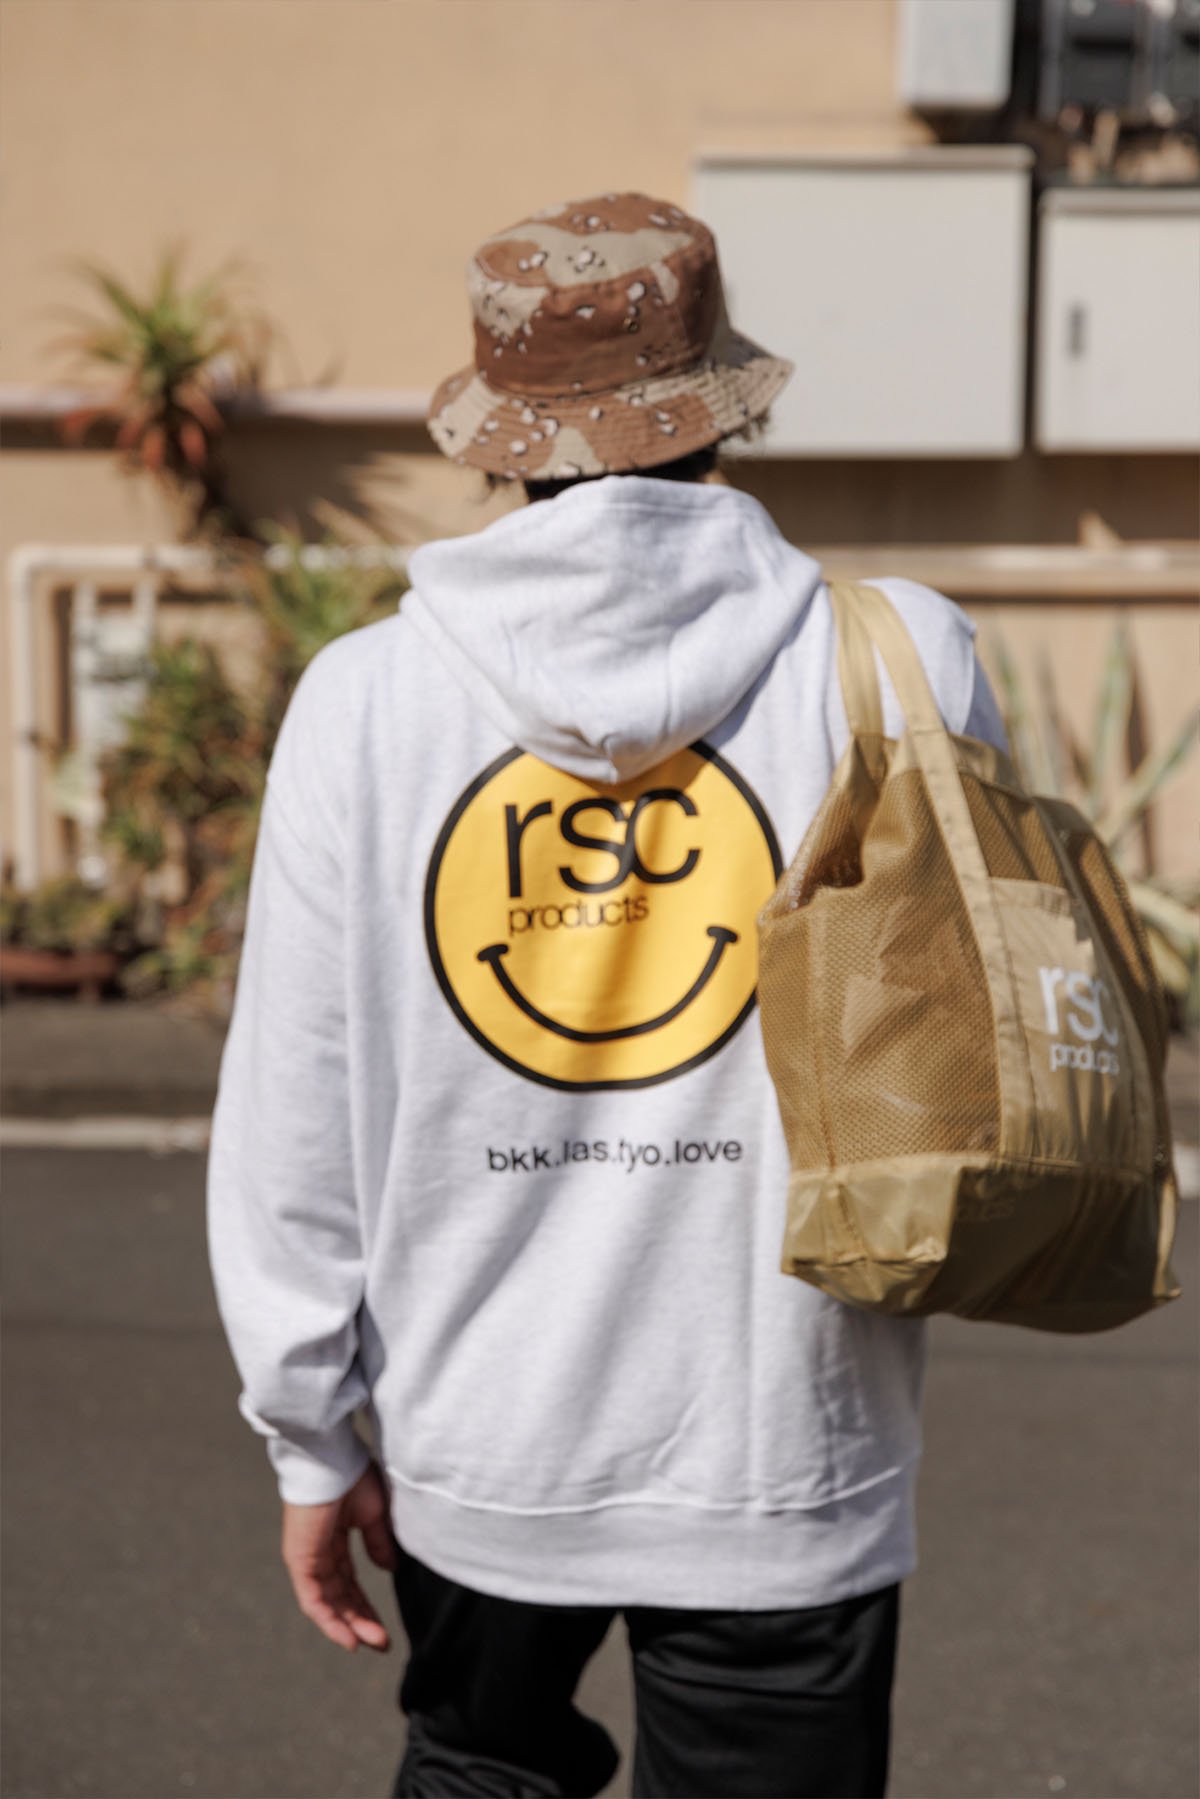 rscproducts OFFICIAL ONLINE STORE